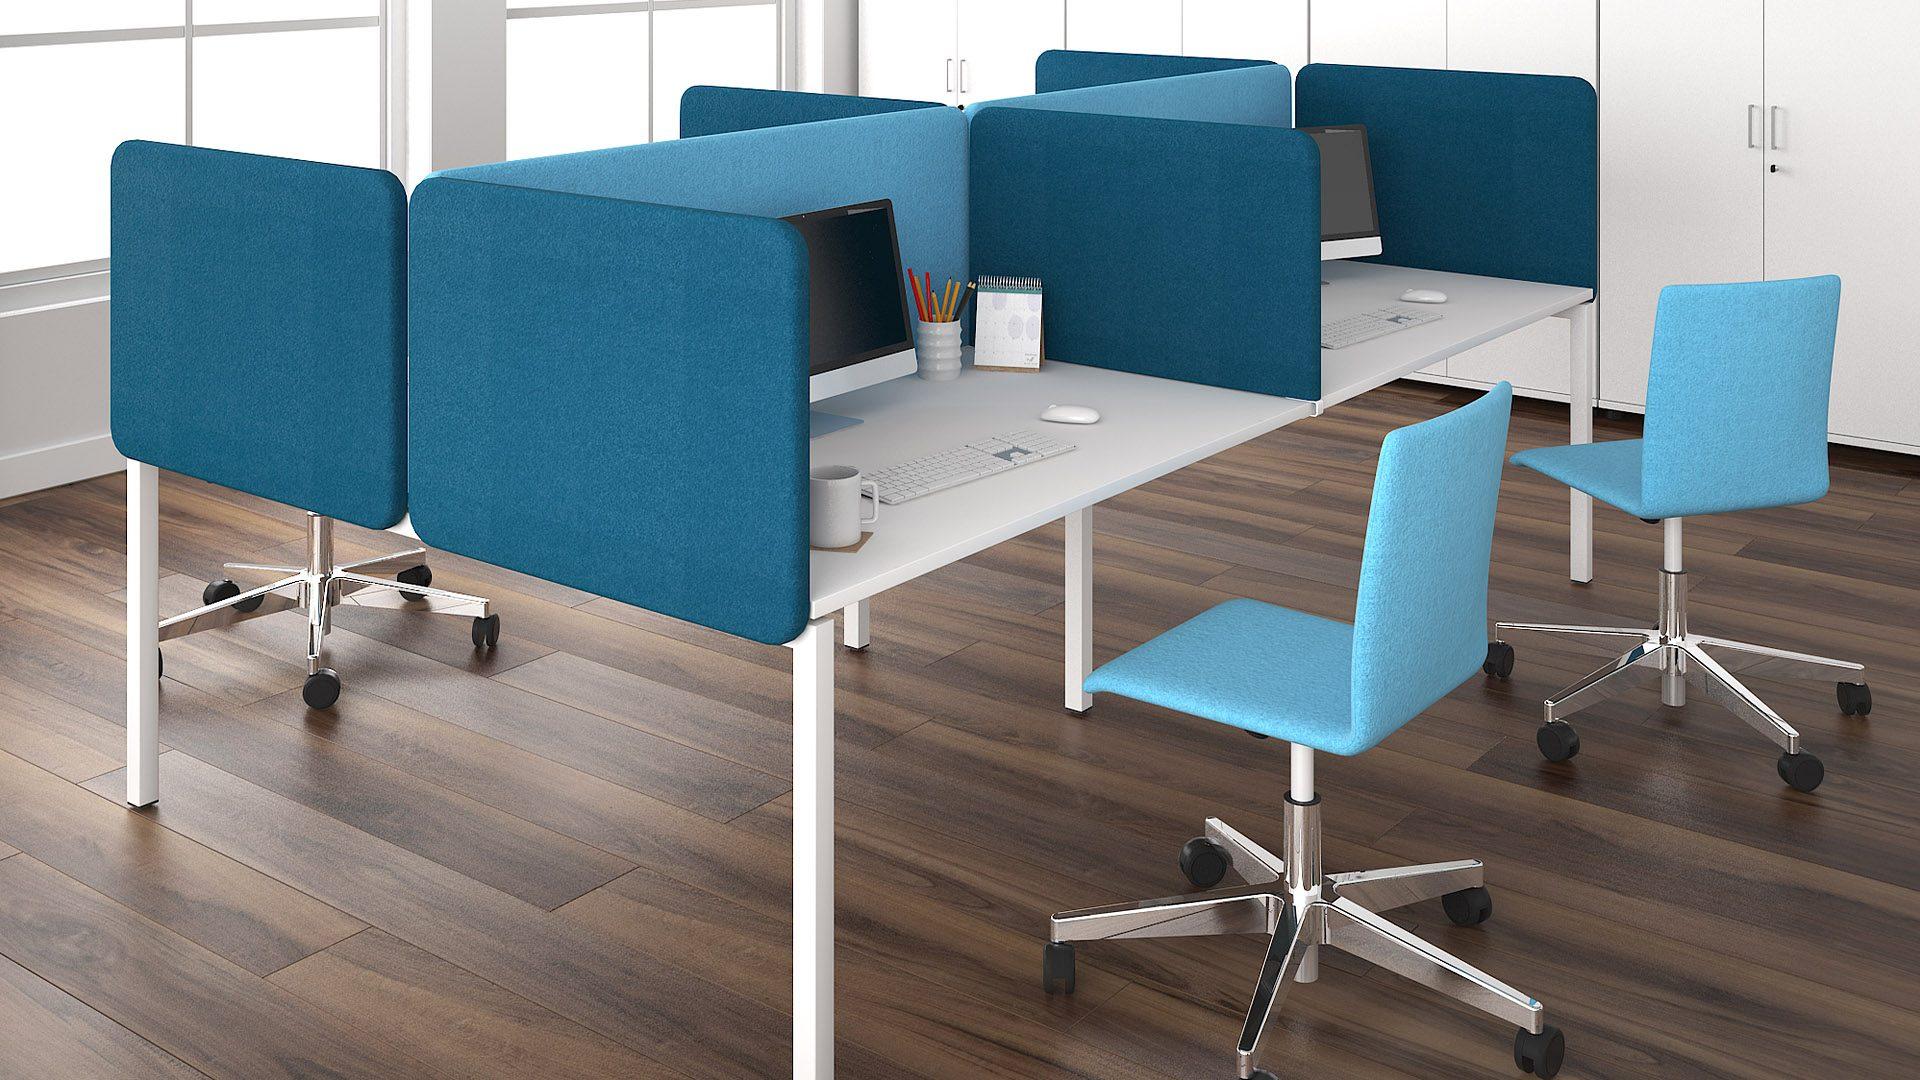 Create desk partitions with Top 530 screens and Nova bench desking